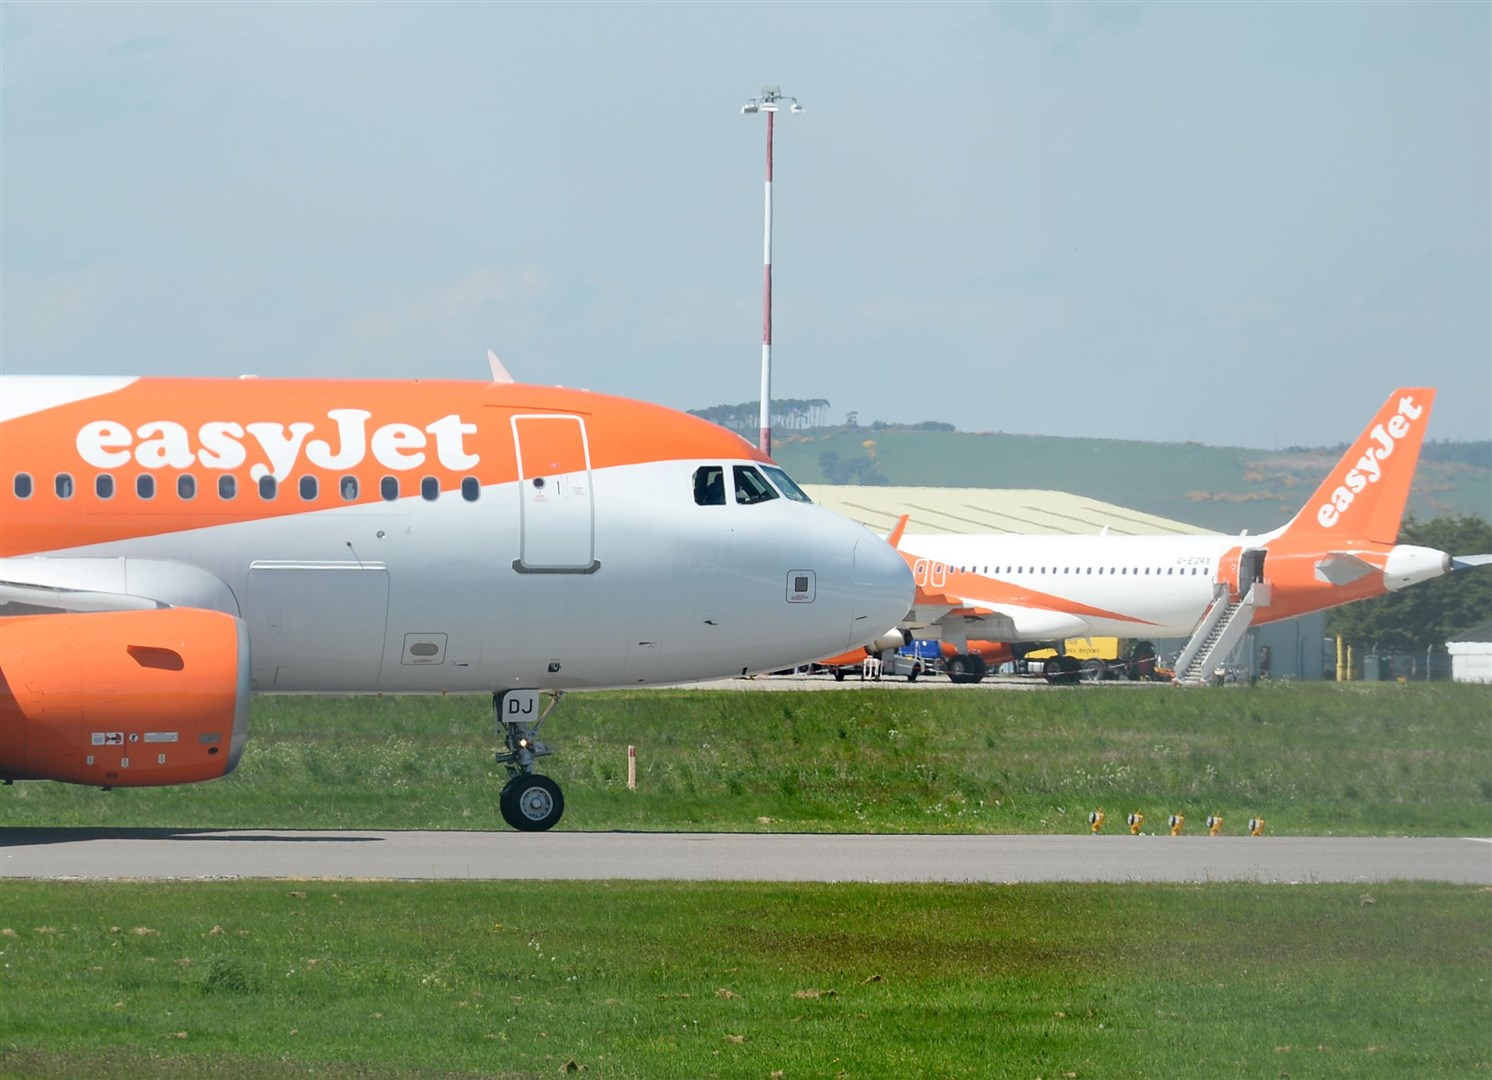 easyJet at Inverness airport.